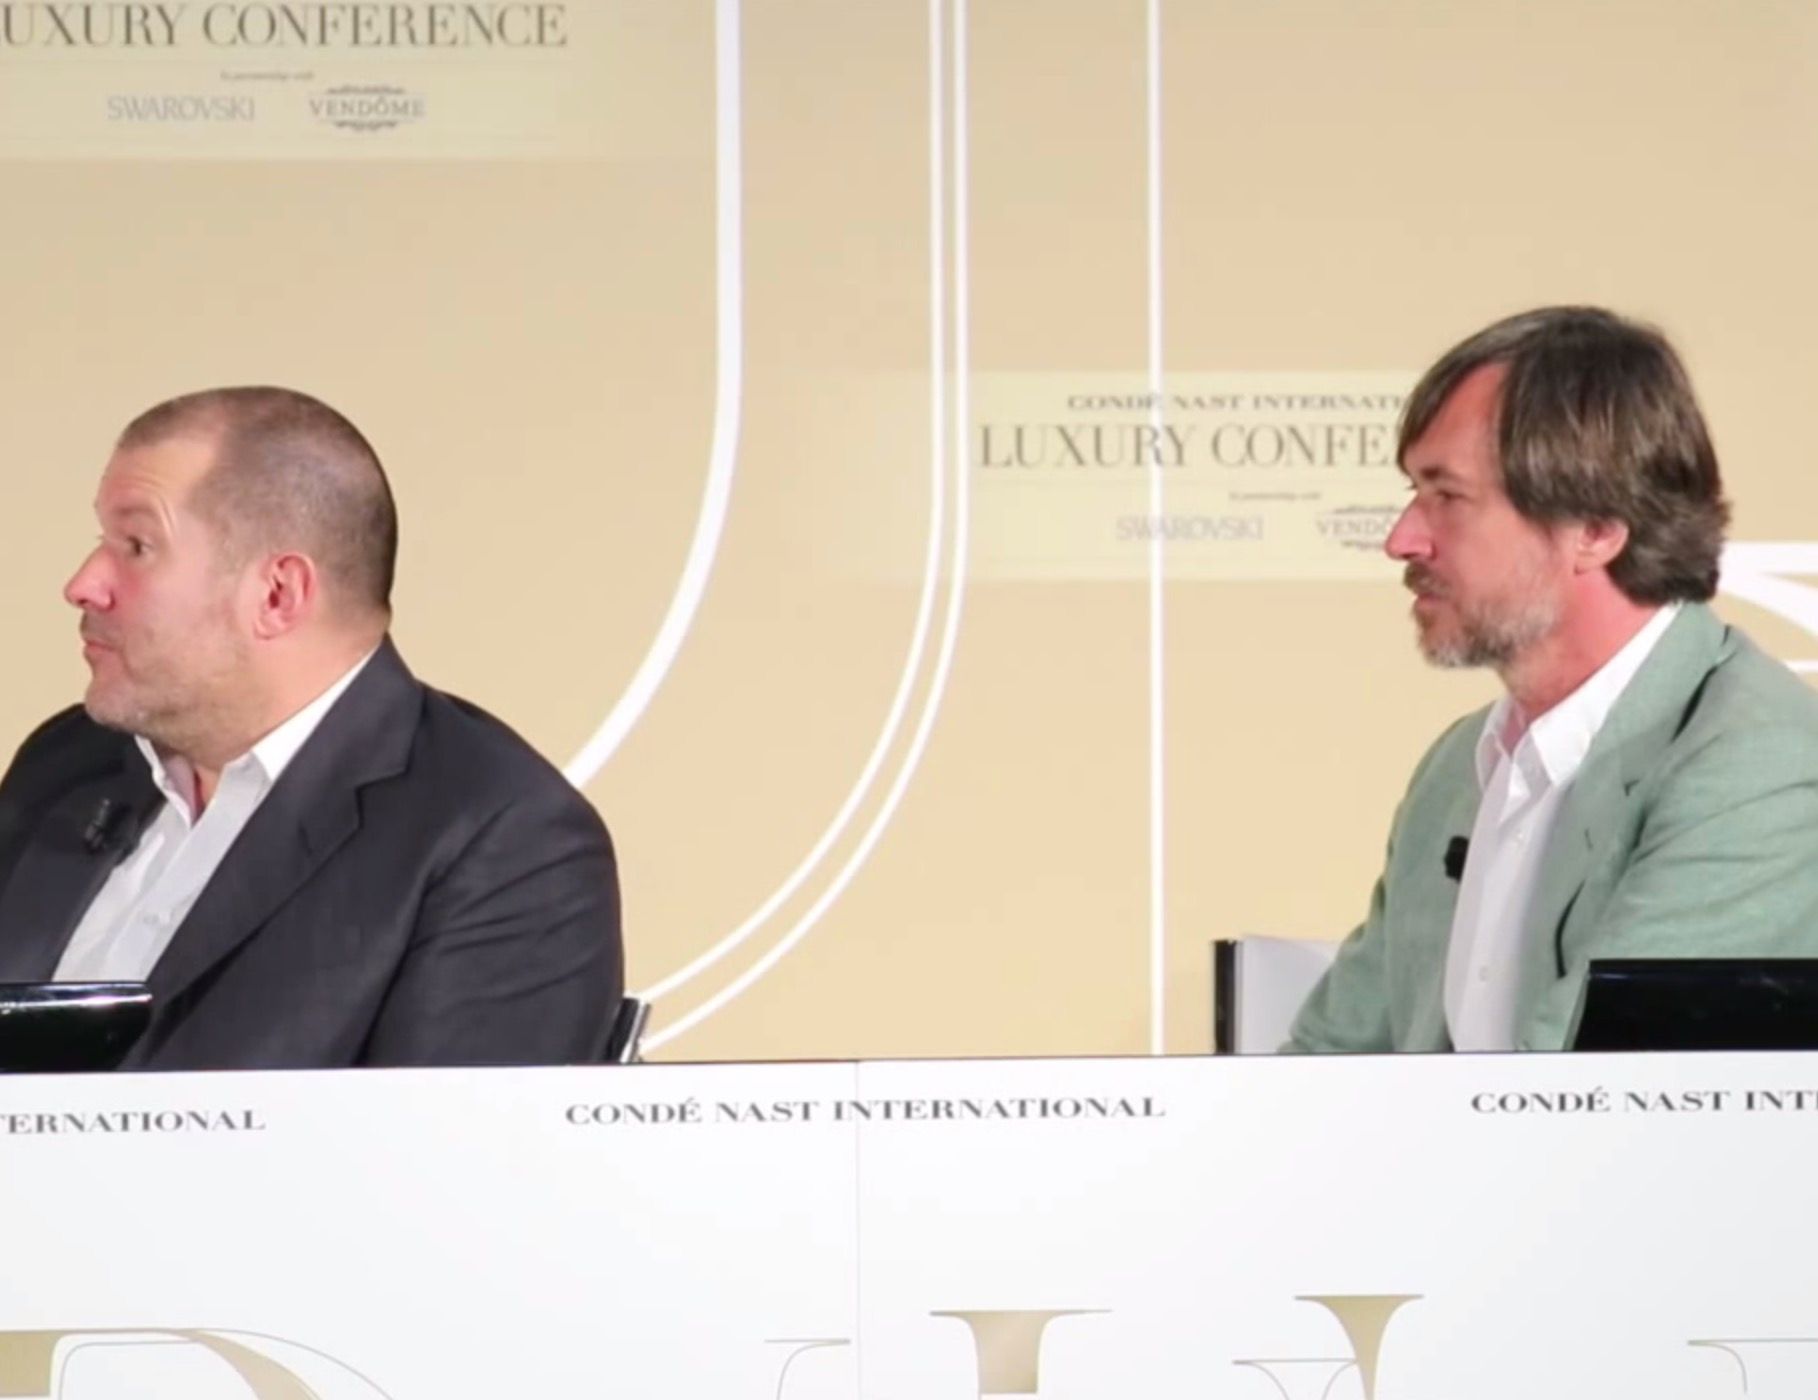 watch jony ive and marc newson talk about why they designed apple watch image 1